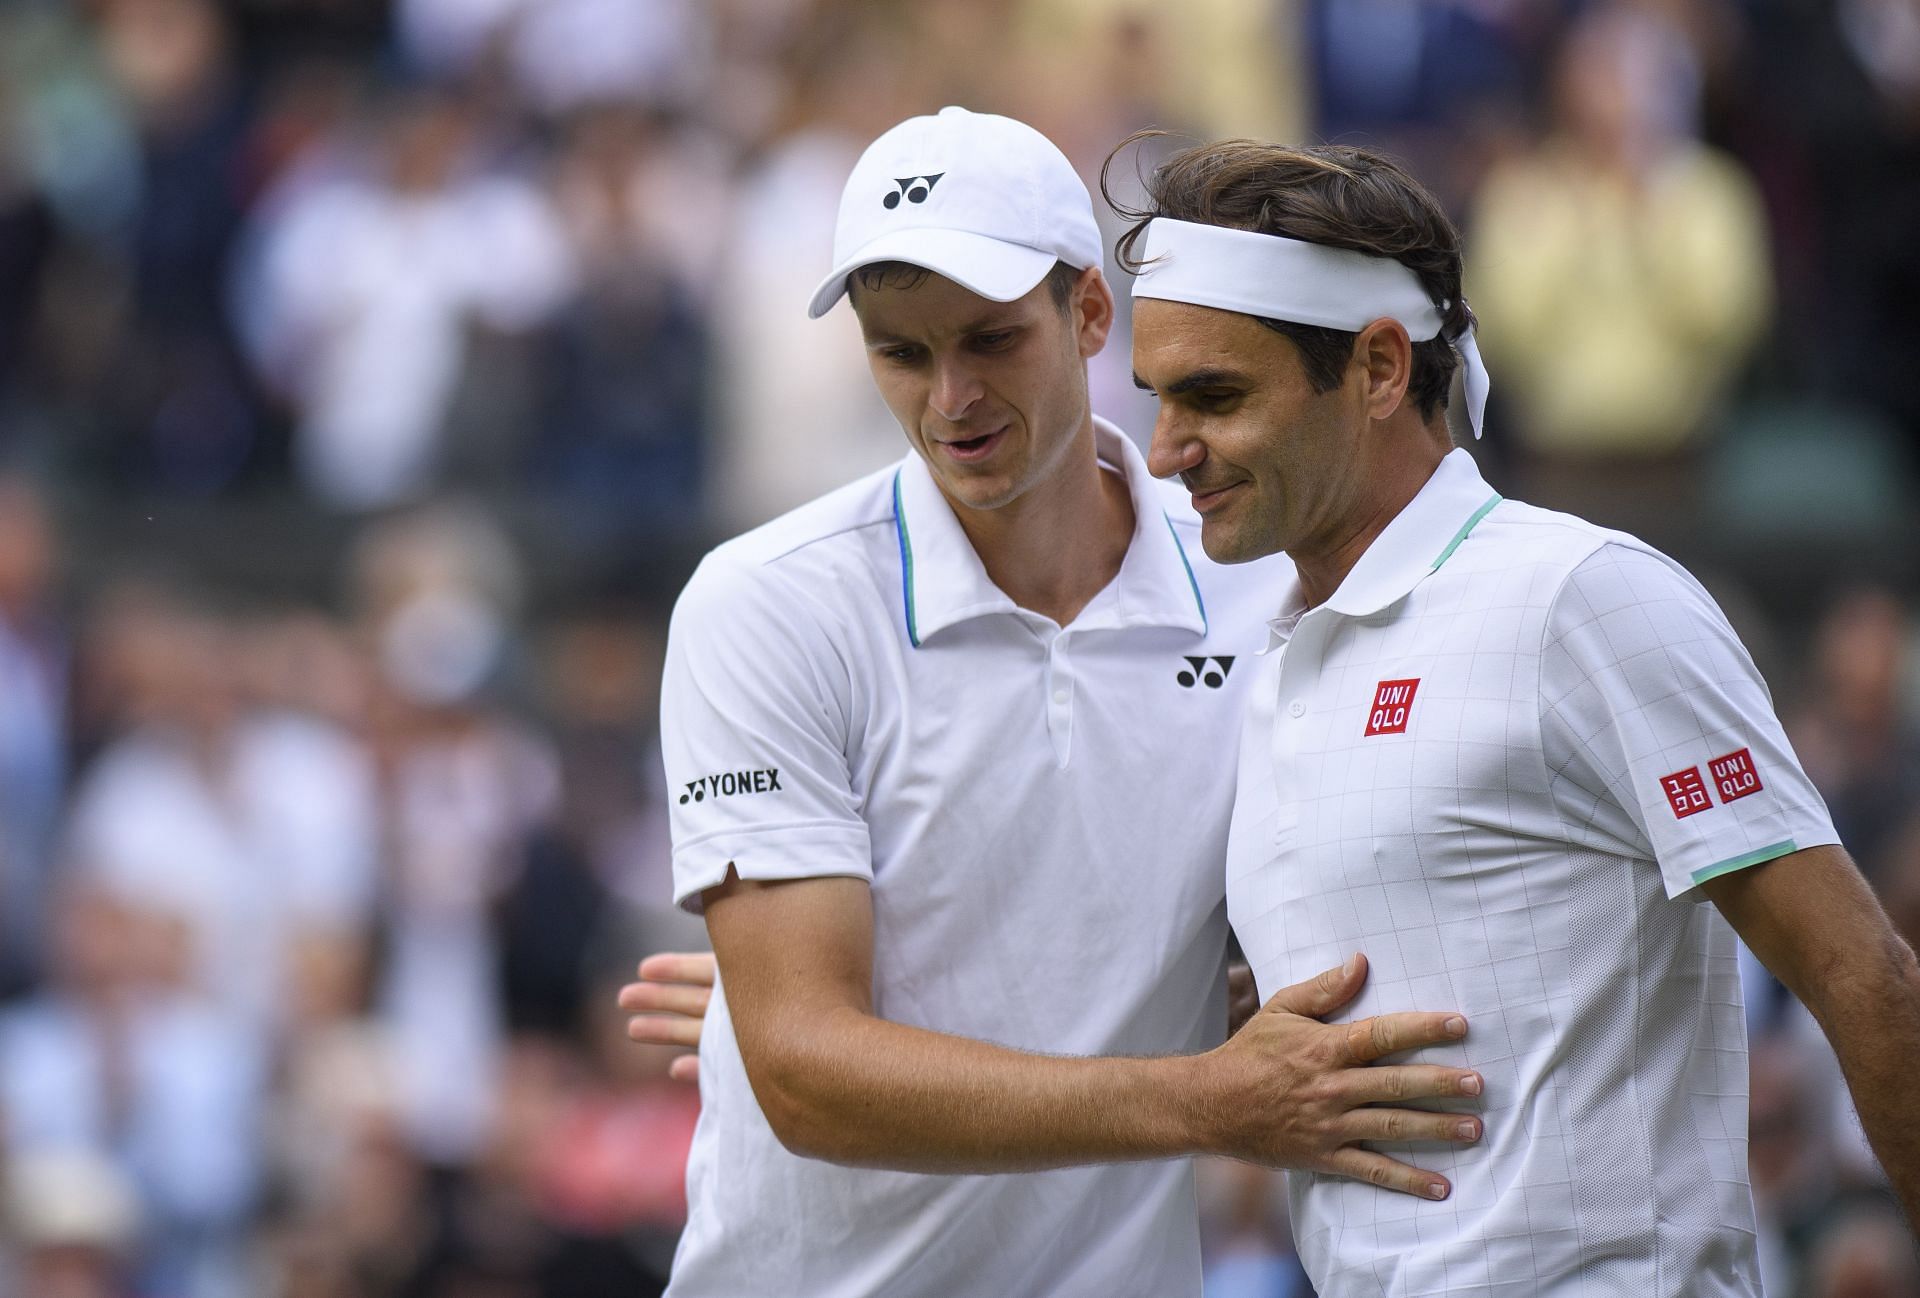 Roger Federer&#039;s last game to date was his defeat to Hubert Hurkacz at the 2021 Wimbledon Championships.